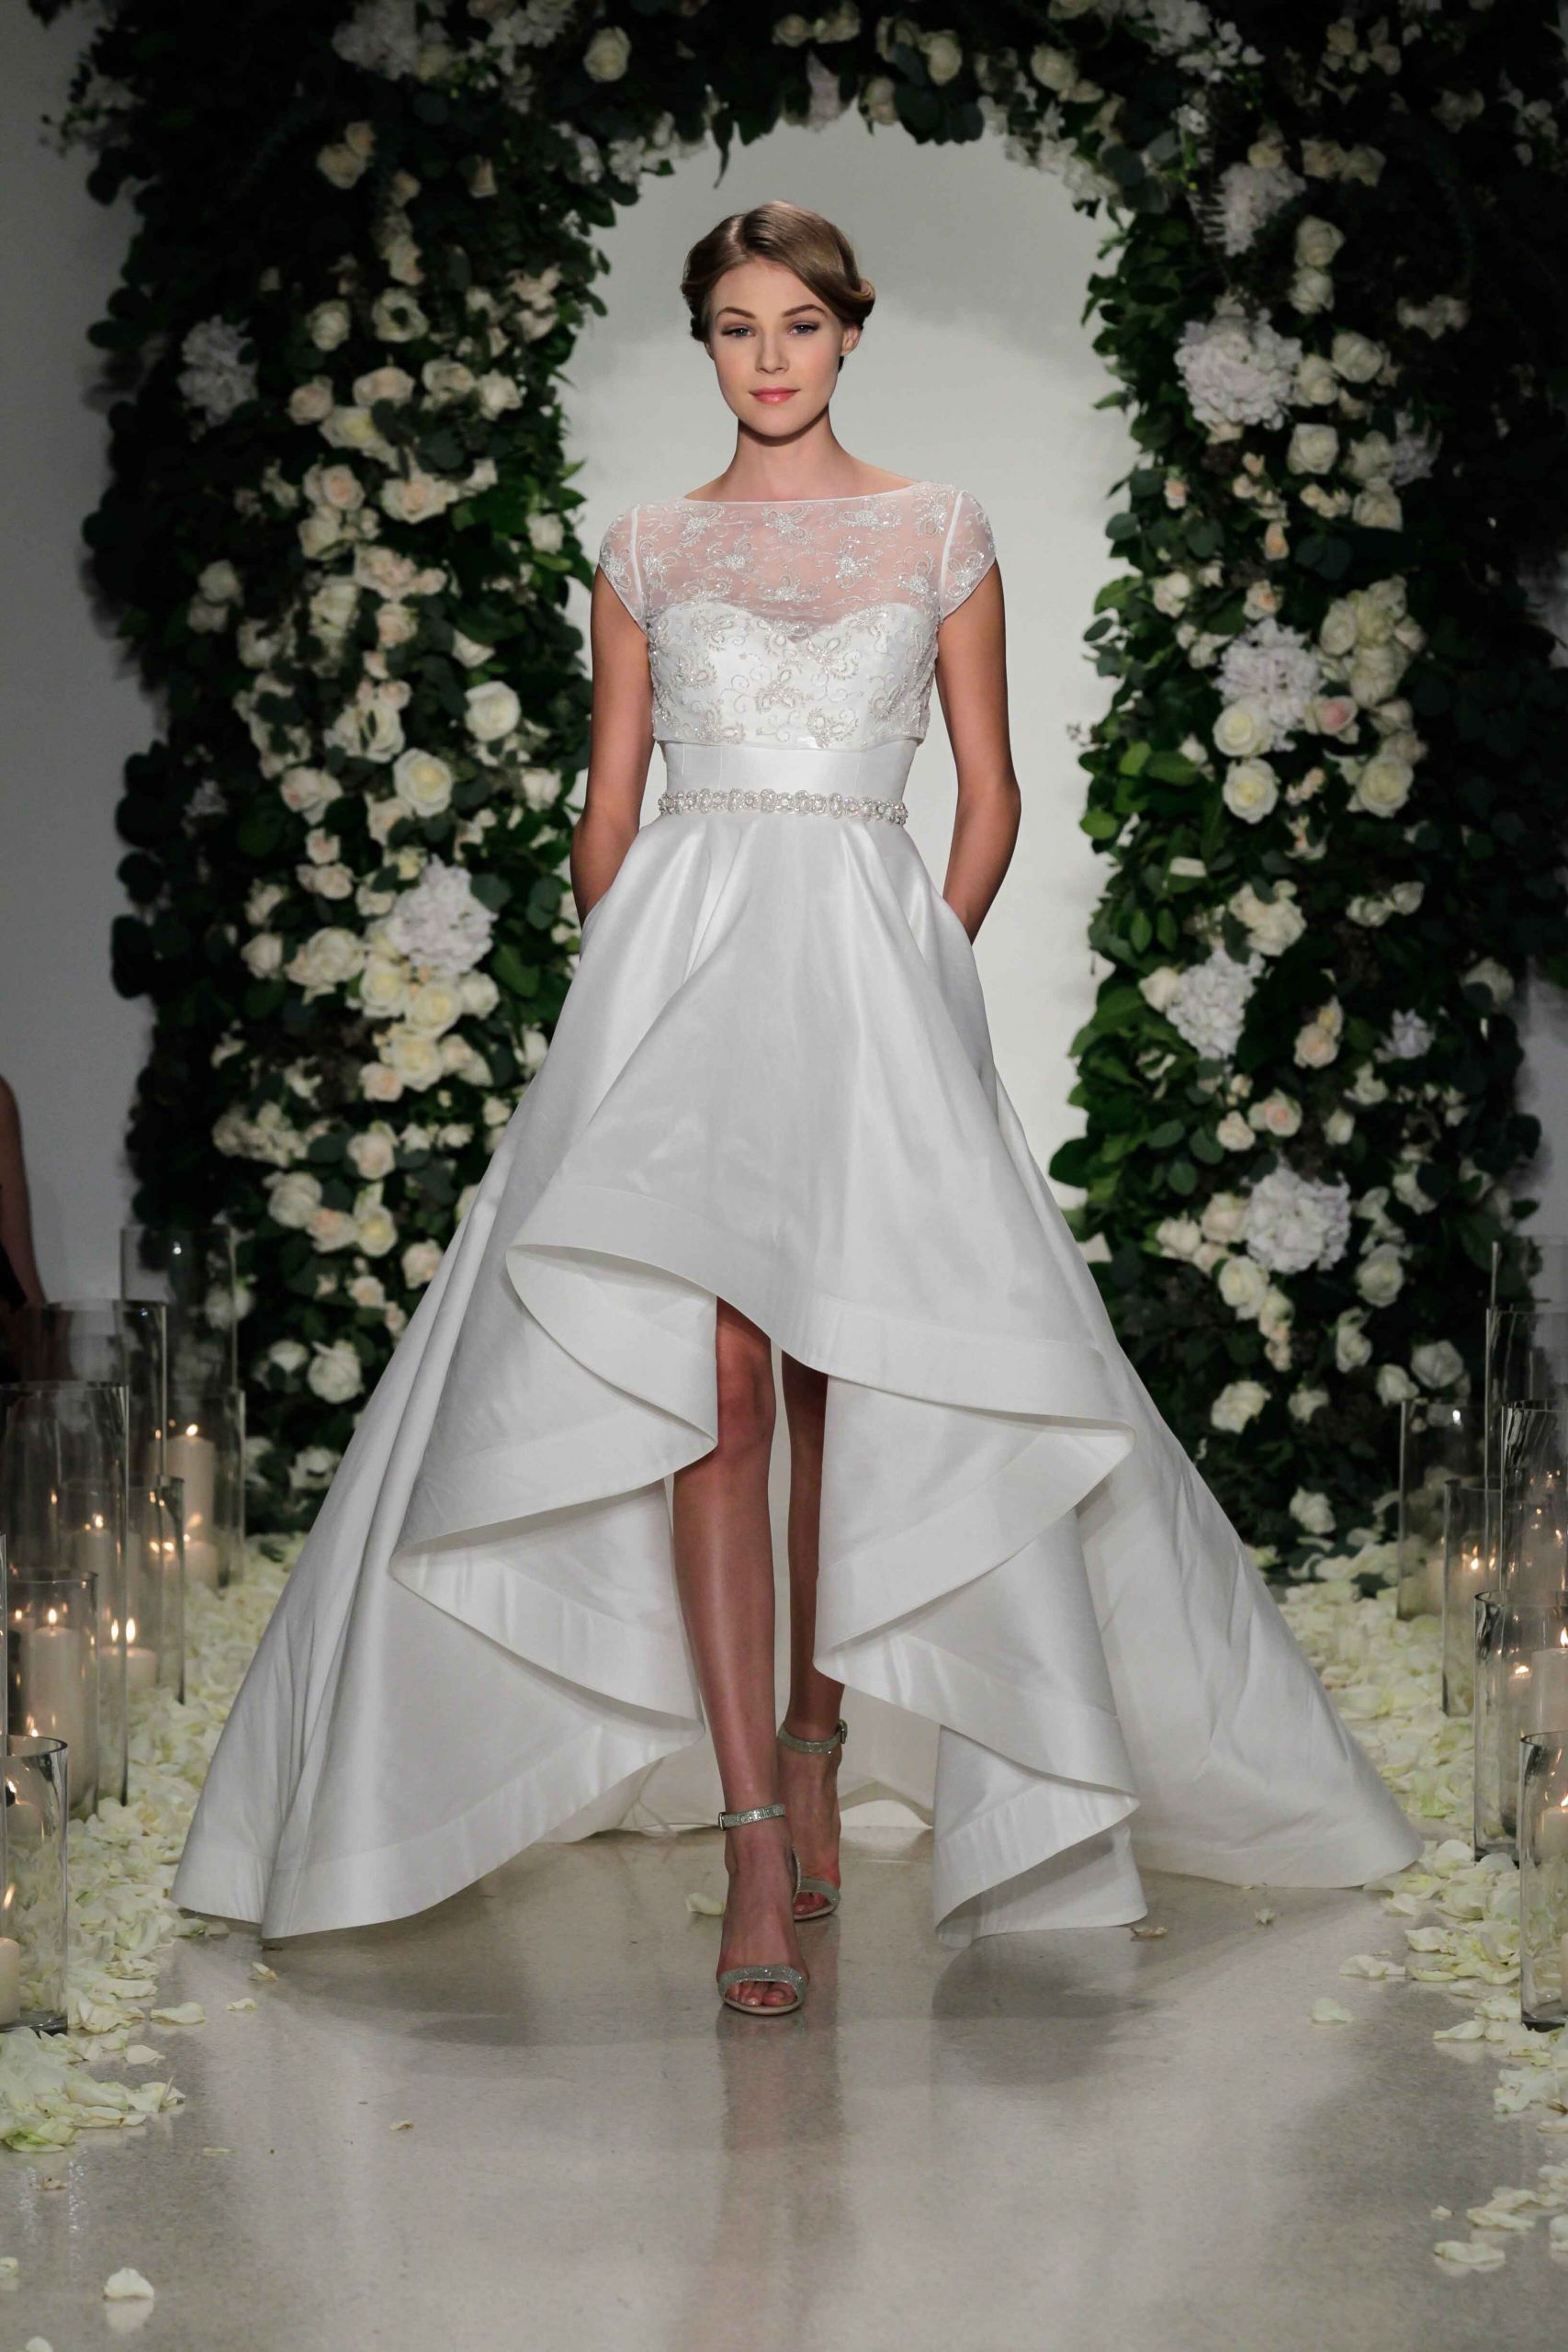 High Low Wedding Gown
 Whitney Port s Wedding Dress Get the High Low Look